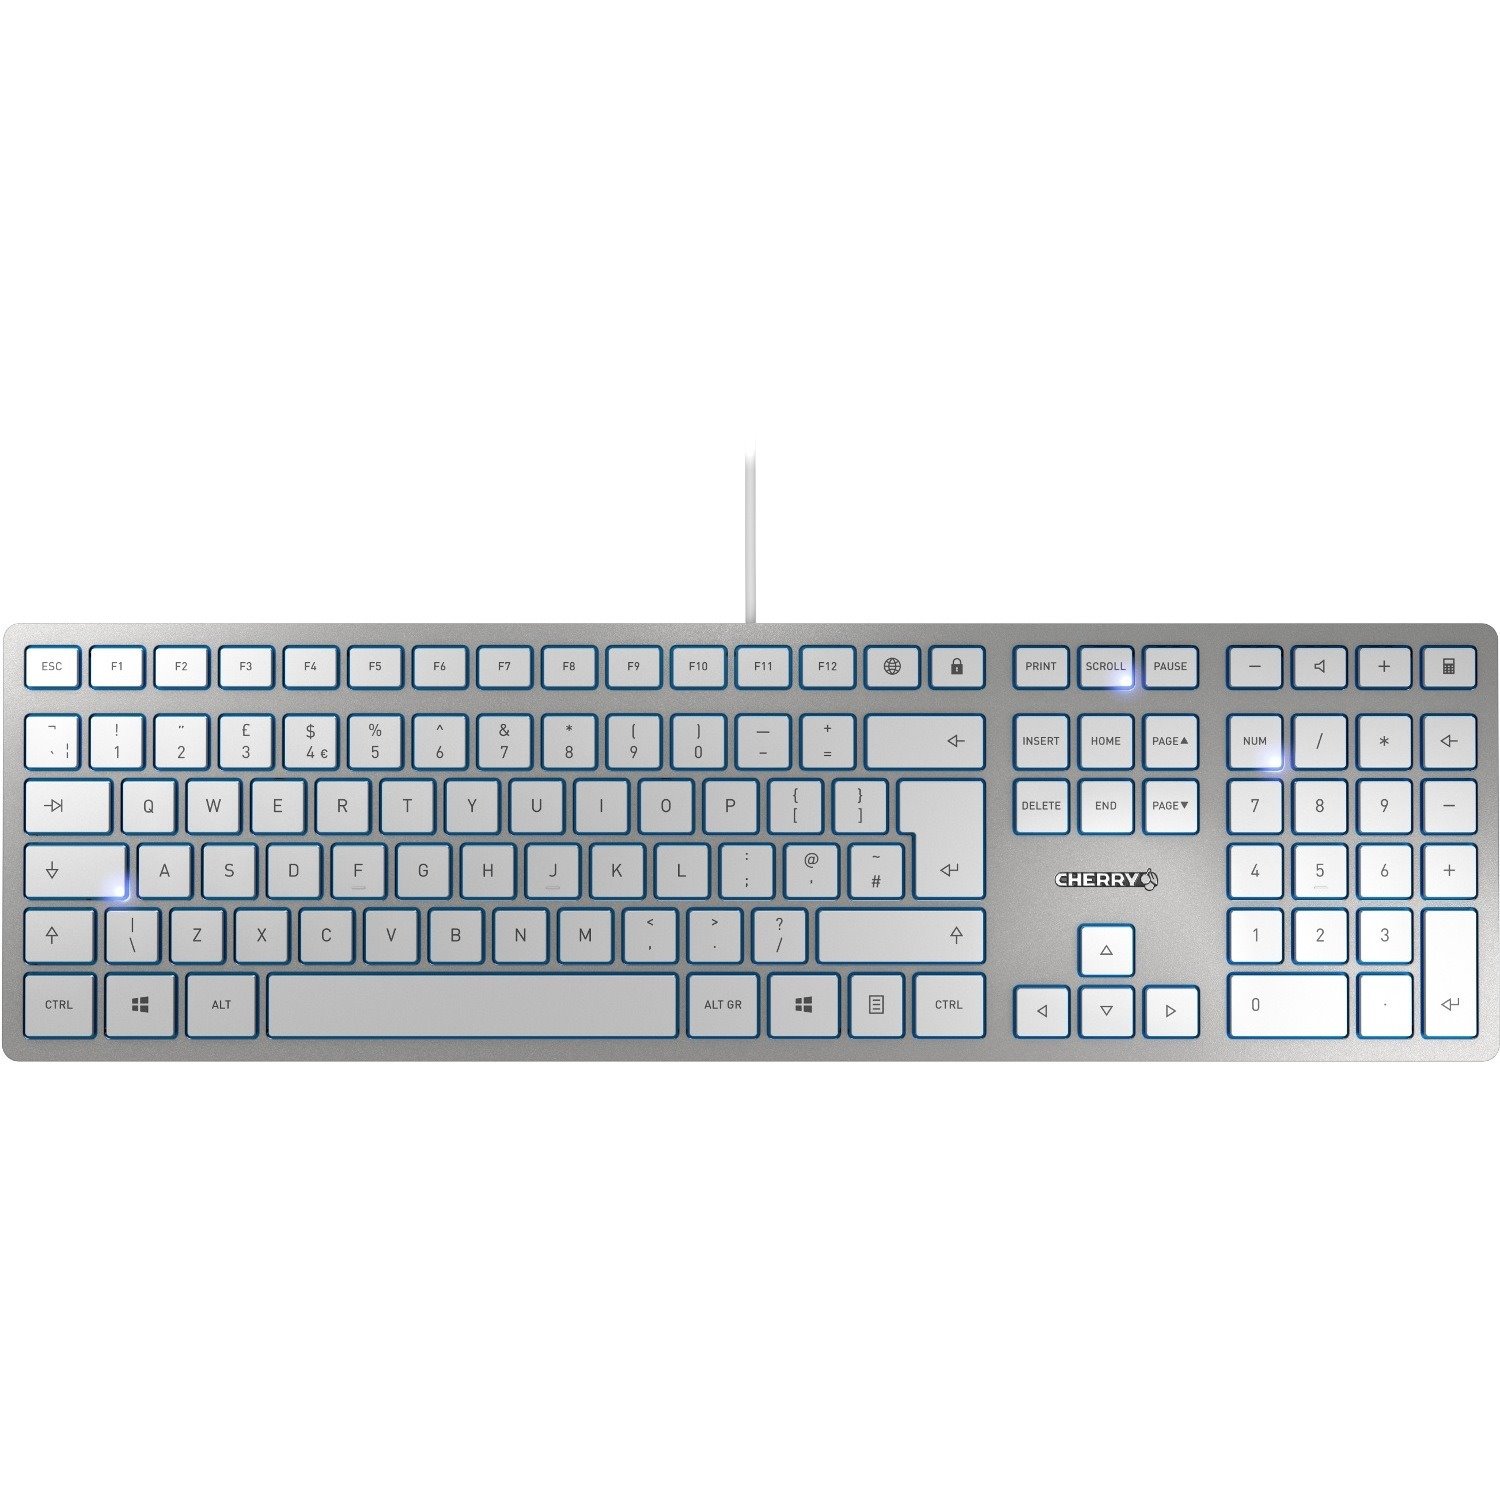 CHERRY KC 6000 SLIM Keyboard - Cable Connectivity - USB Interface - English (UK) - Silver